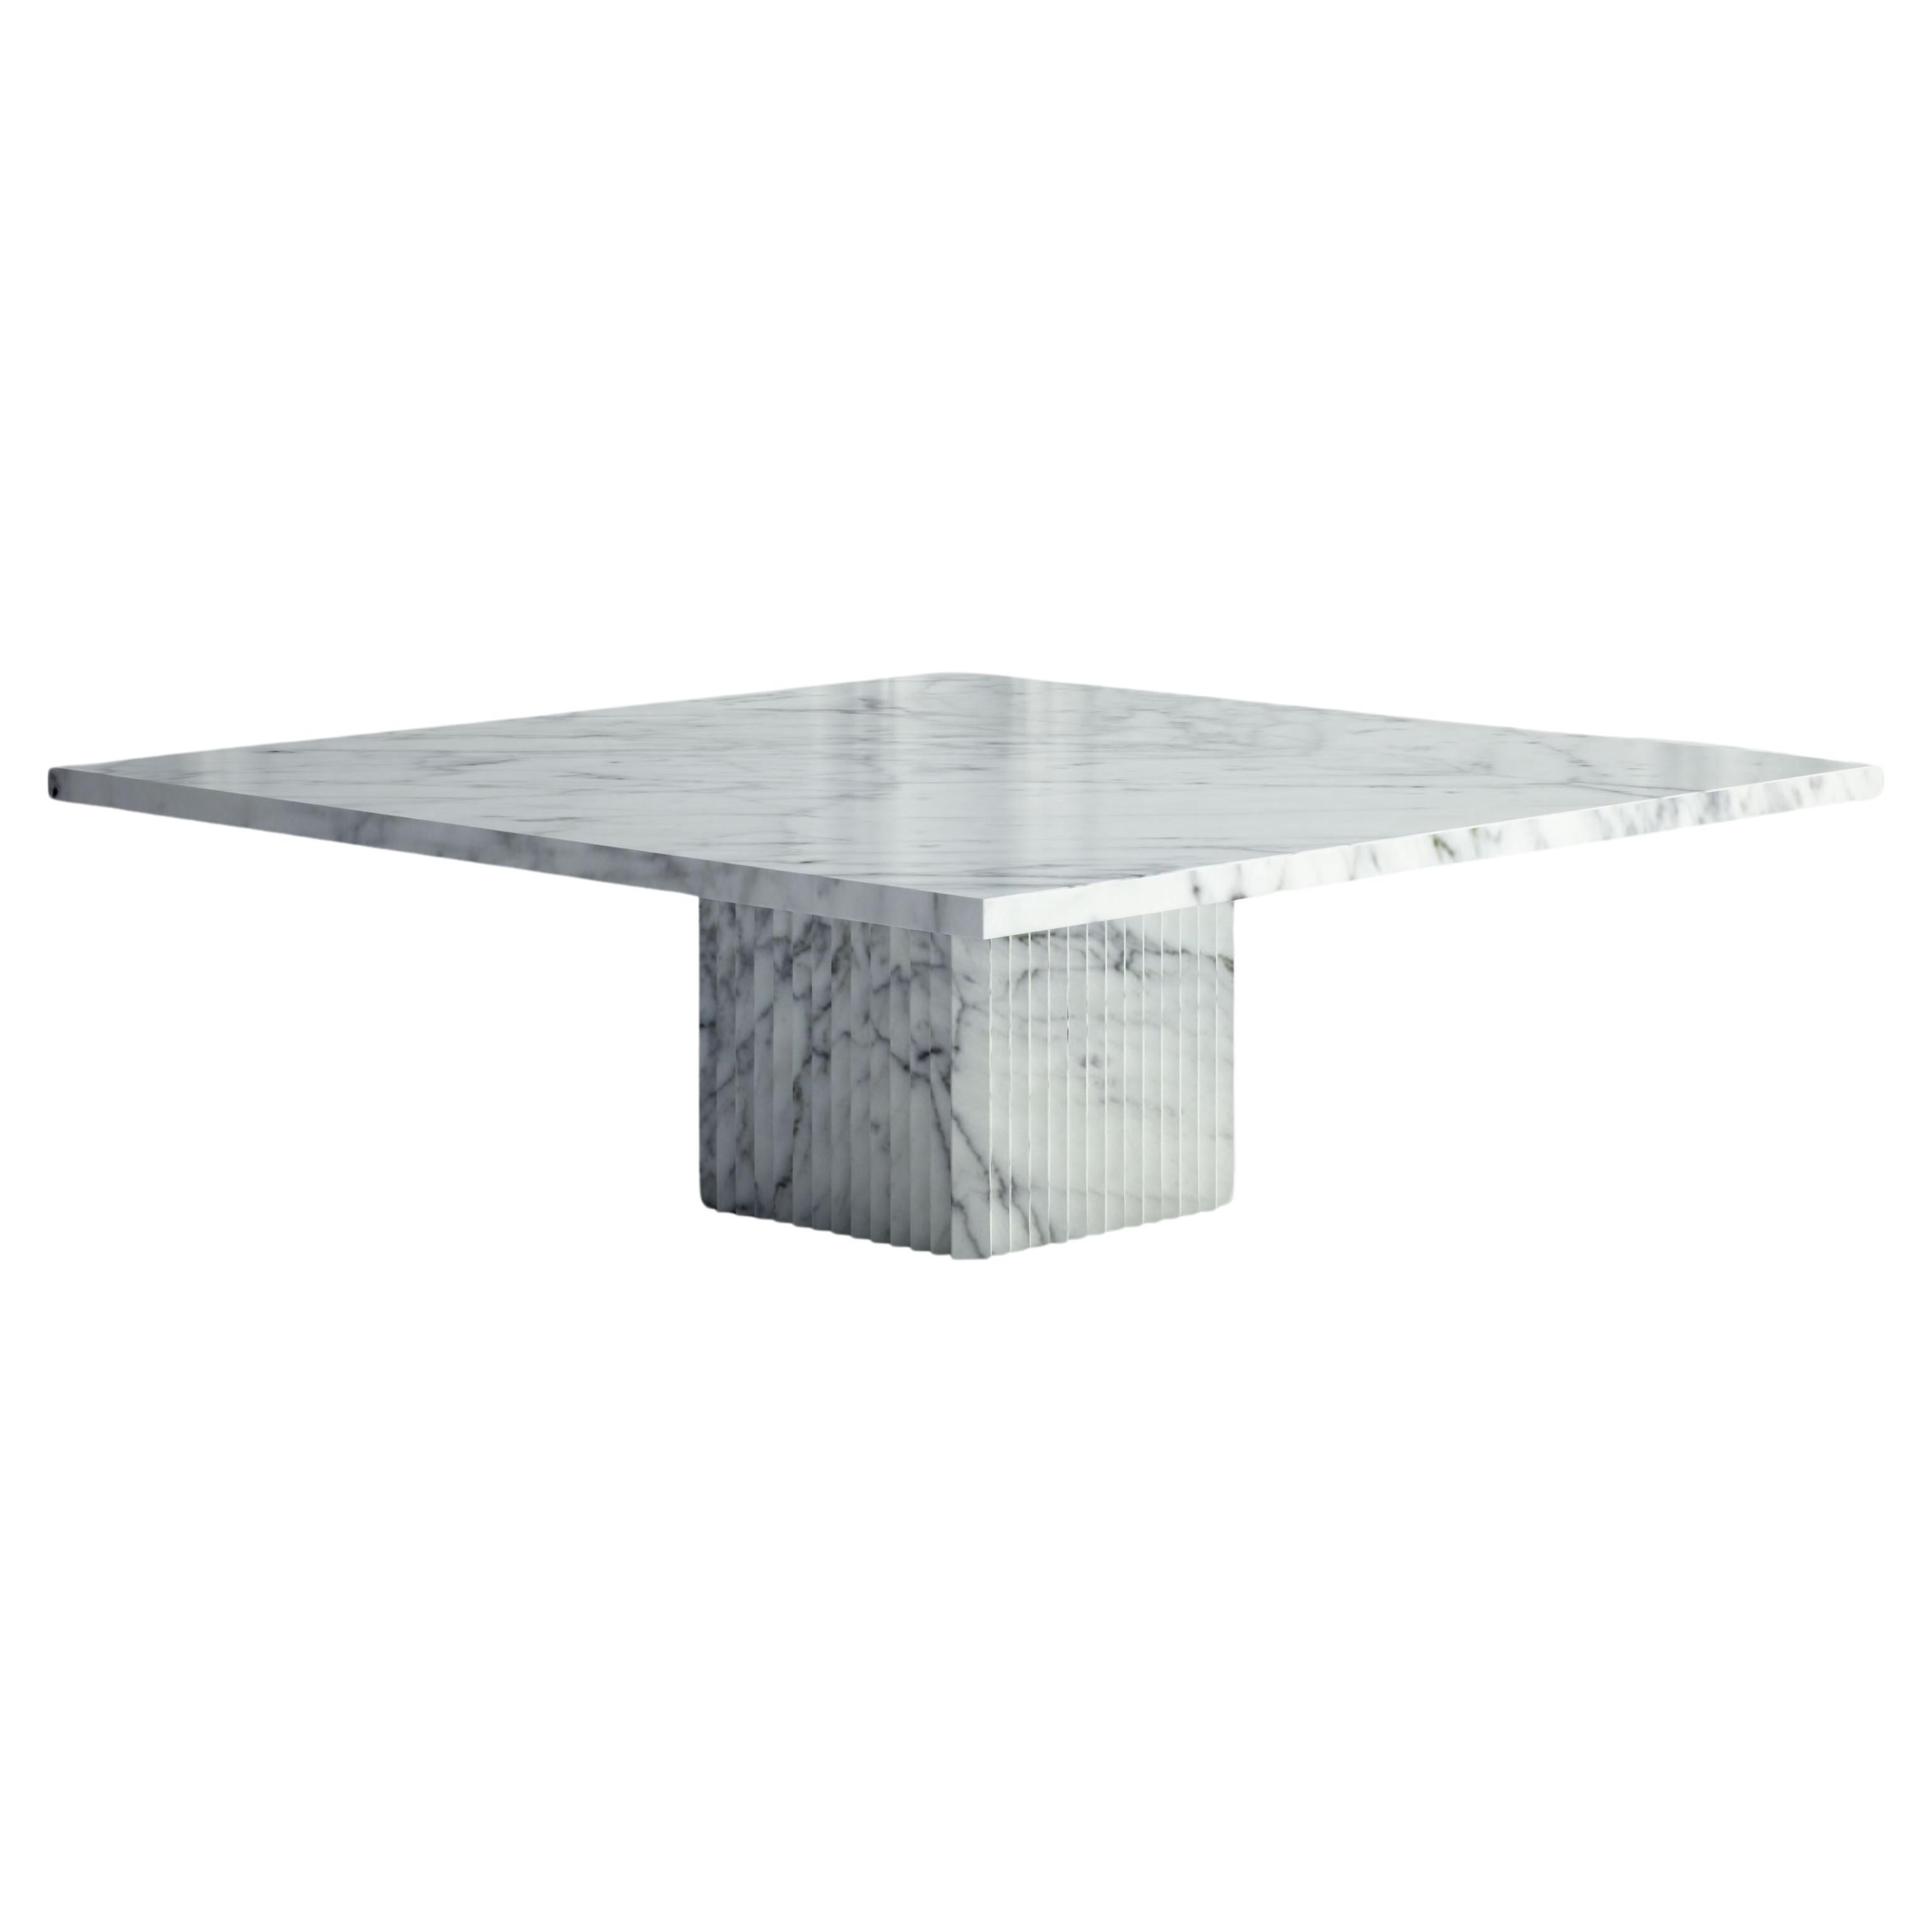 The Odette: A Modern Stone Coffee Table with a Square Top and a Square Base For Sale